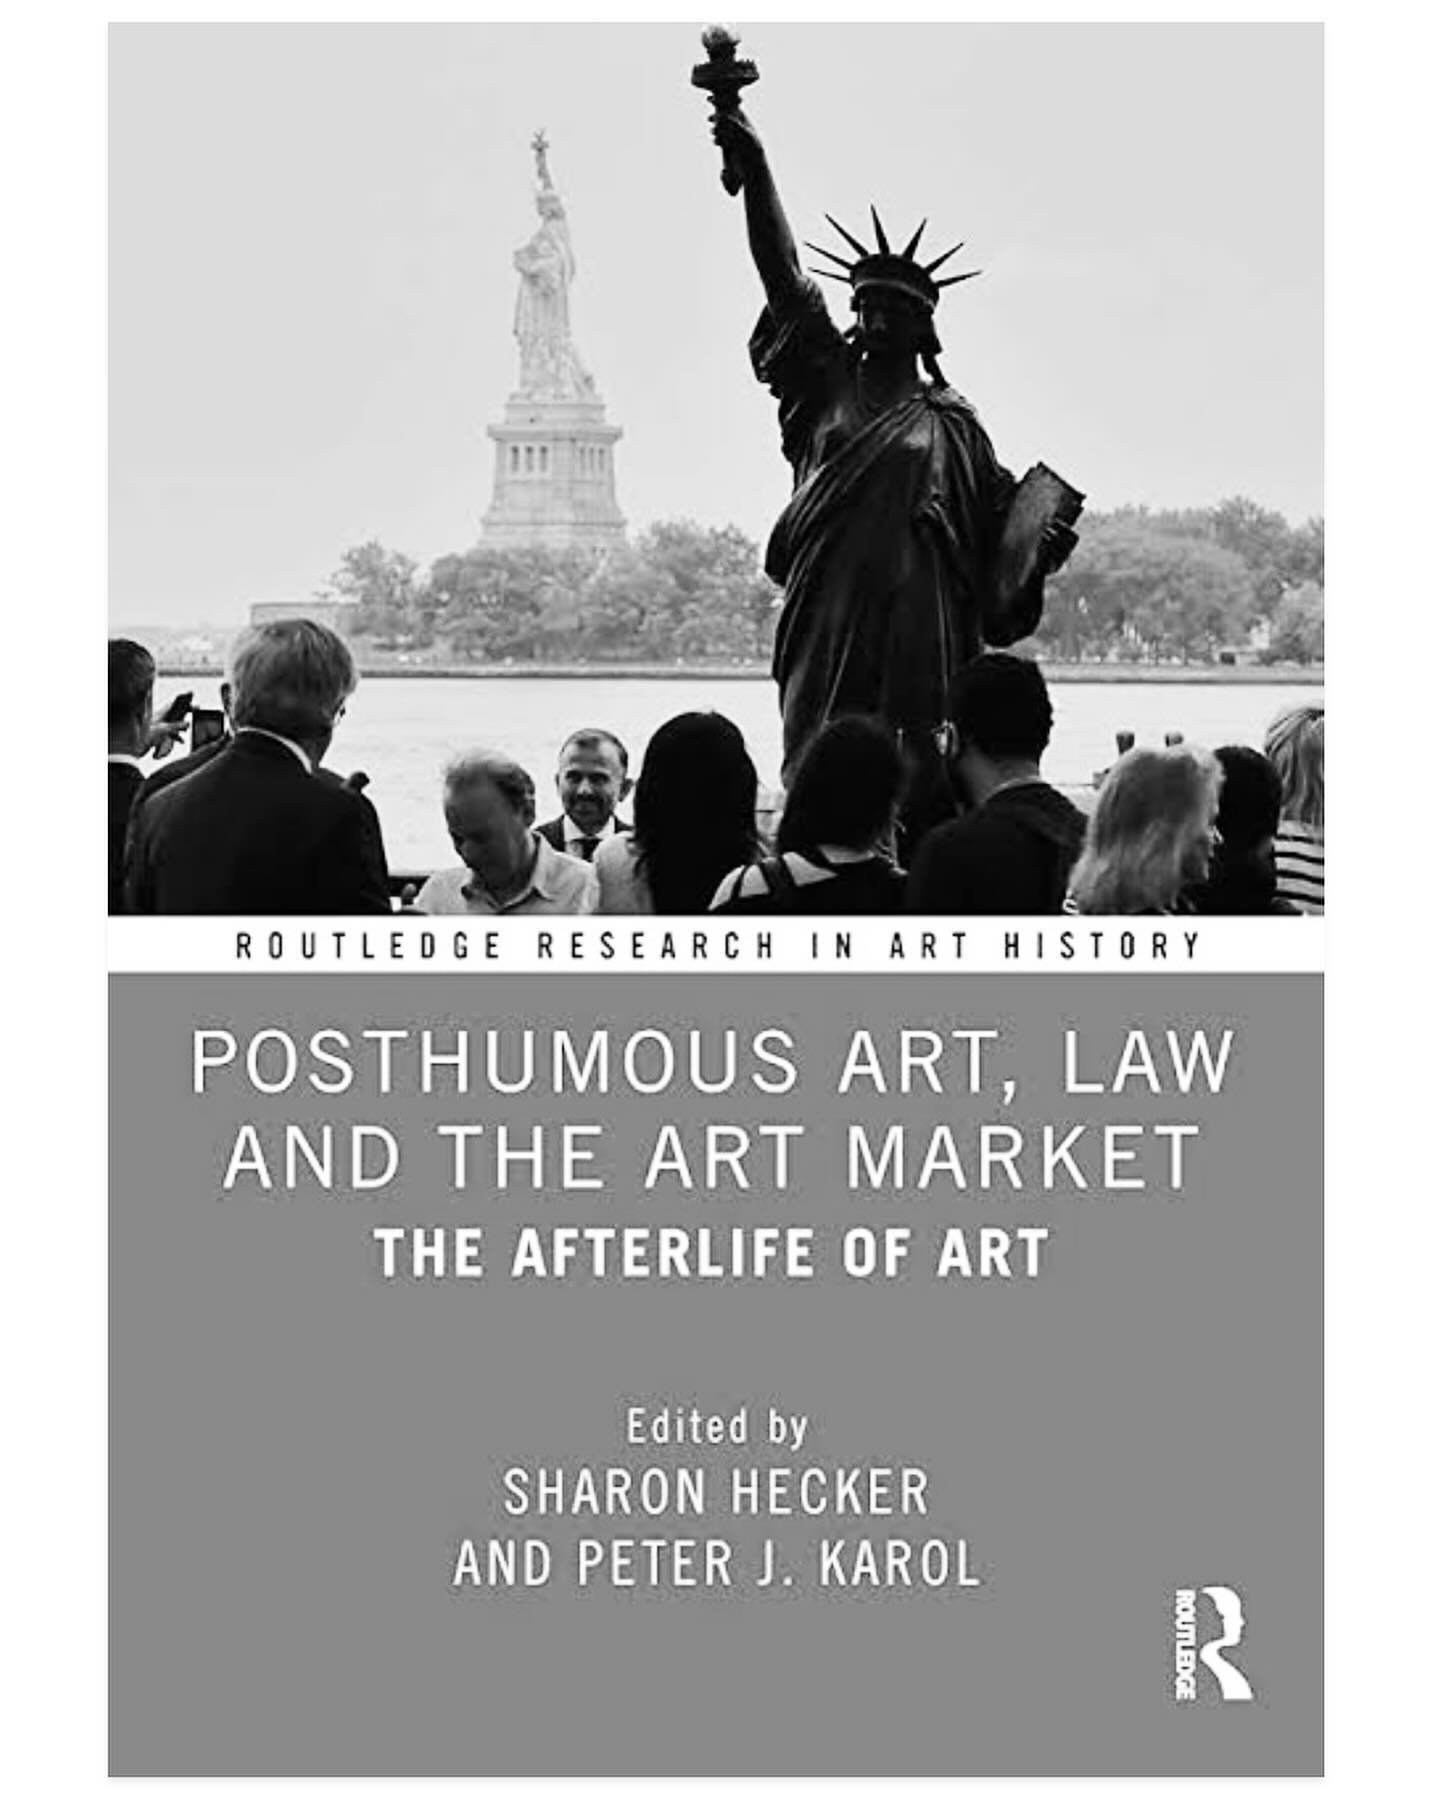 Art Law Library: Posthumous Art, Law and the Art Market: The Afterlife of Art by Sharon Hecker and Peter J. Karol. 

This book examines how art can continue to be made into multiples after an artist has died. How does this work? Who is entitled to 